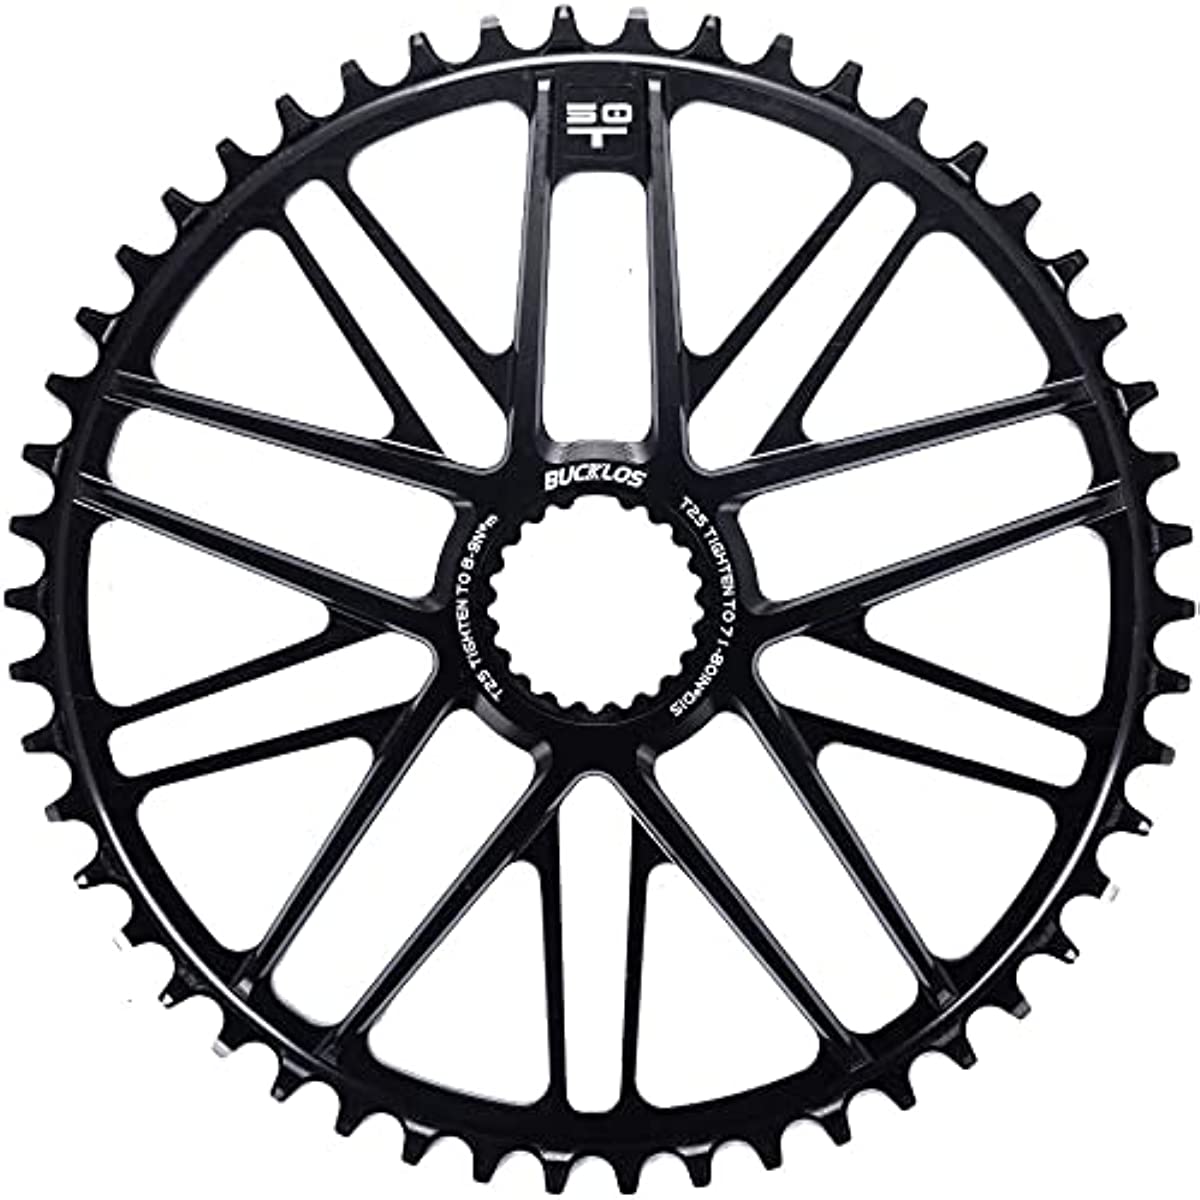 YINO 50T Road Chainring US